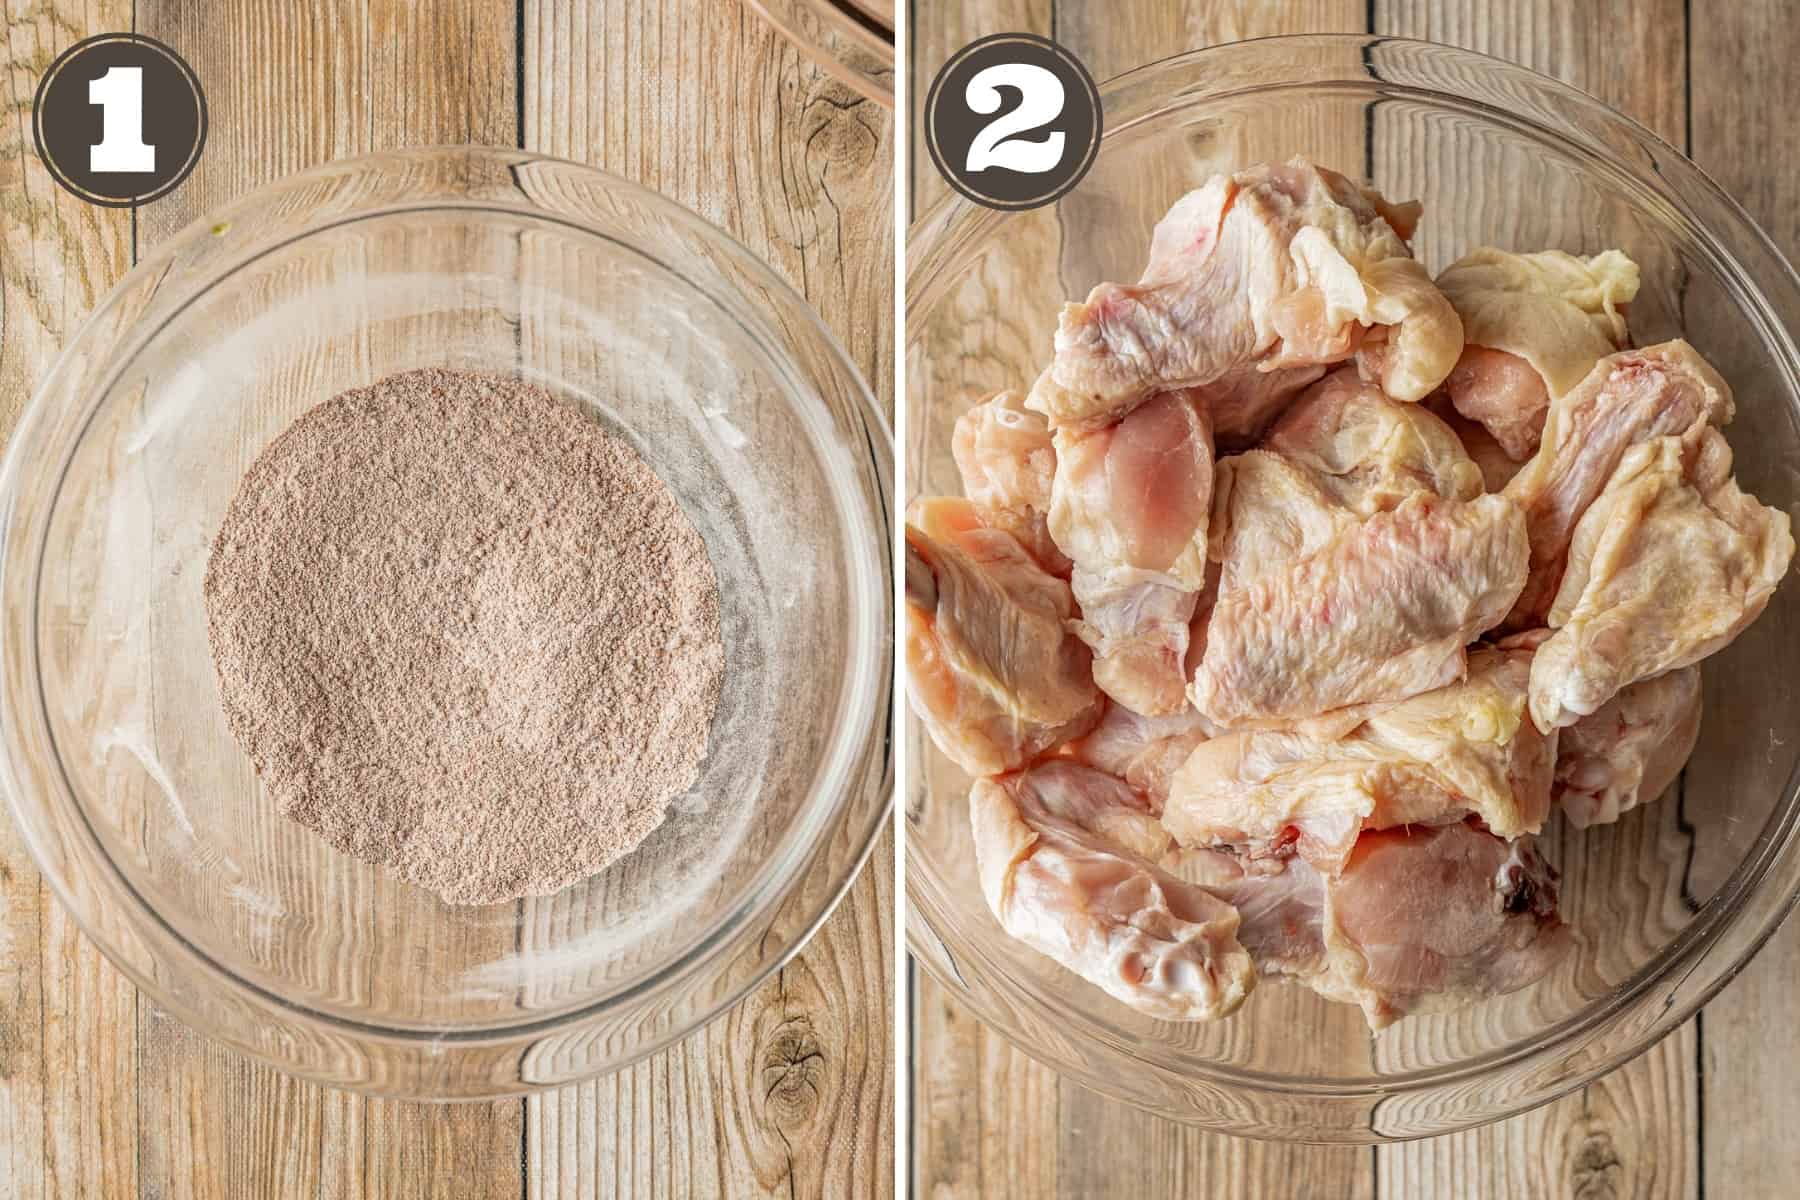 Side by side photos of dry rub spices mixed in a bowl and chicken wings in another glass bowl on a wood background.